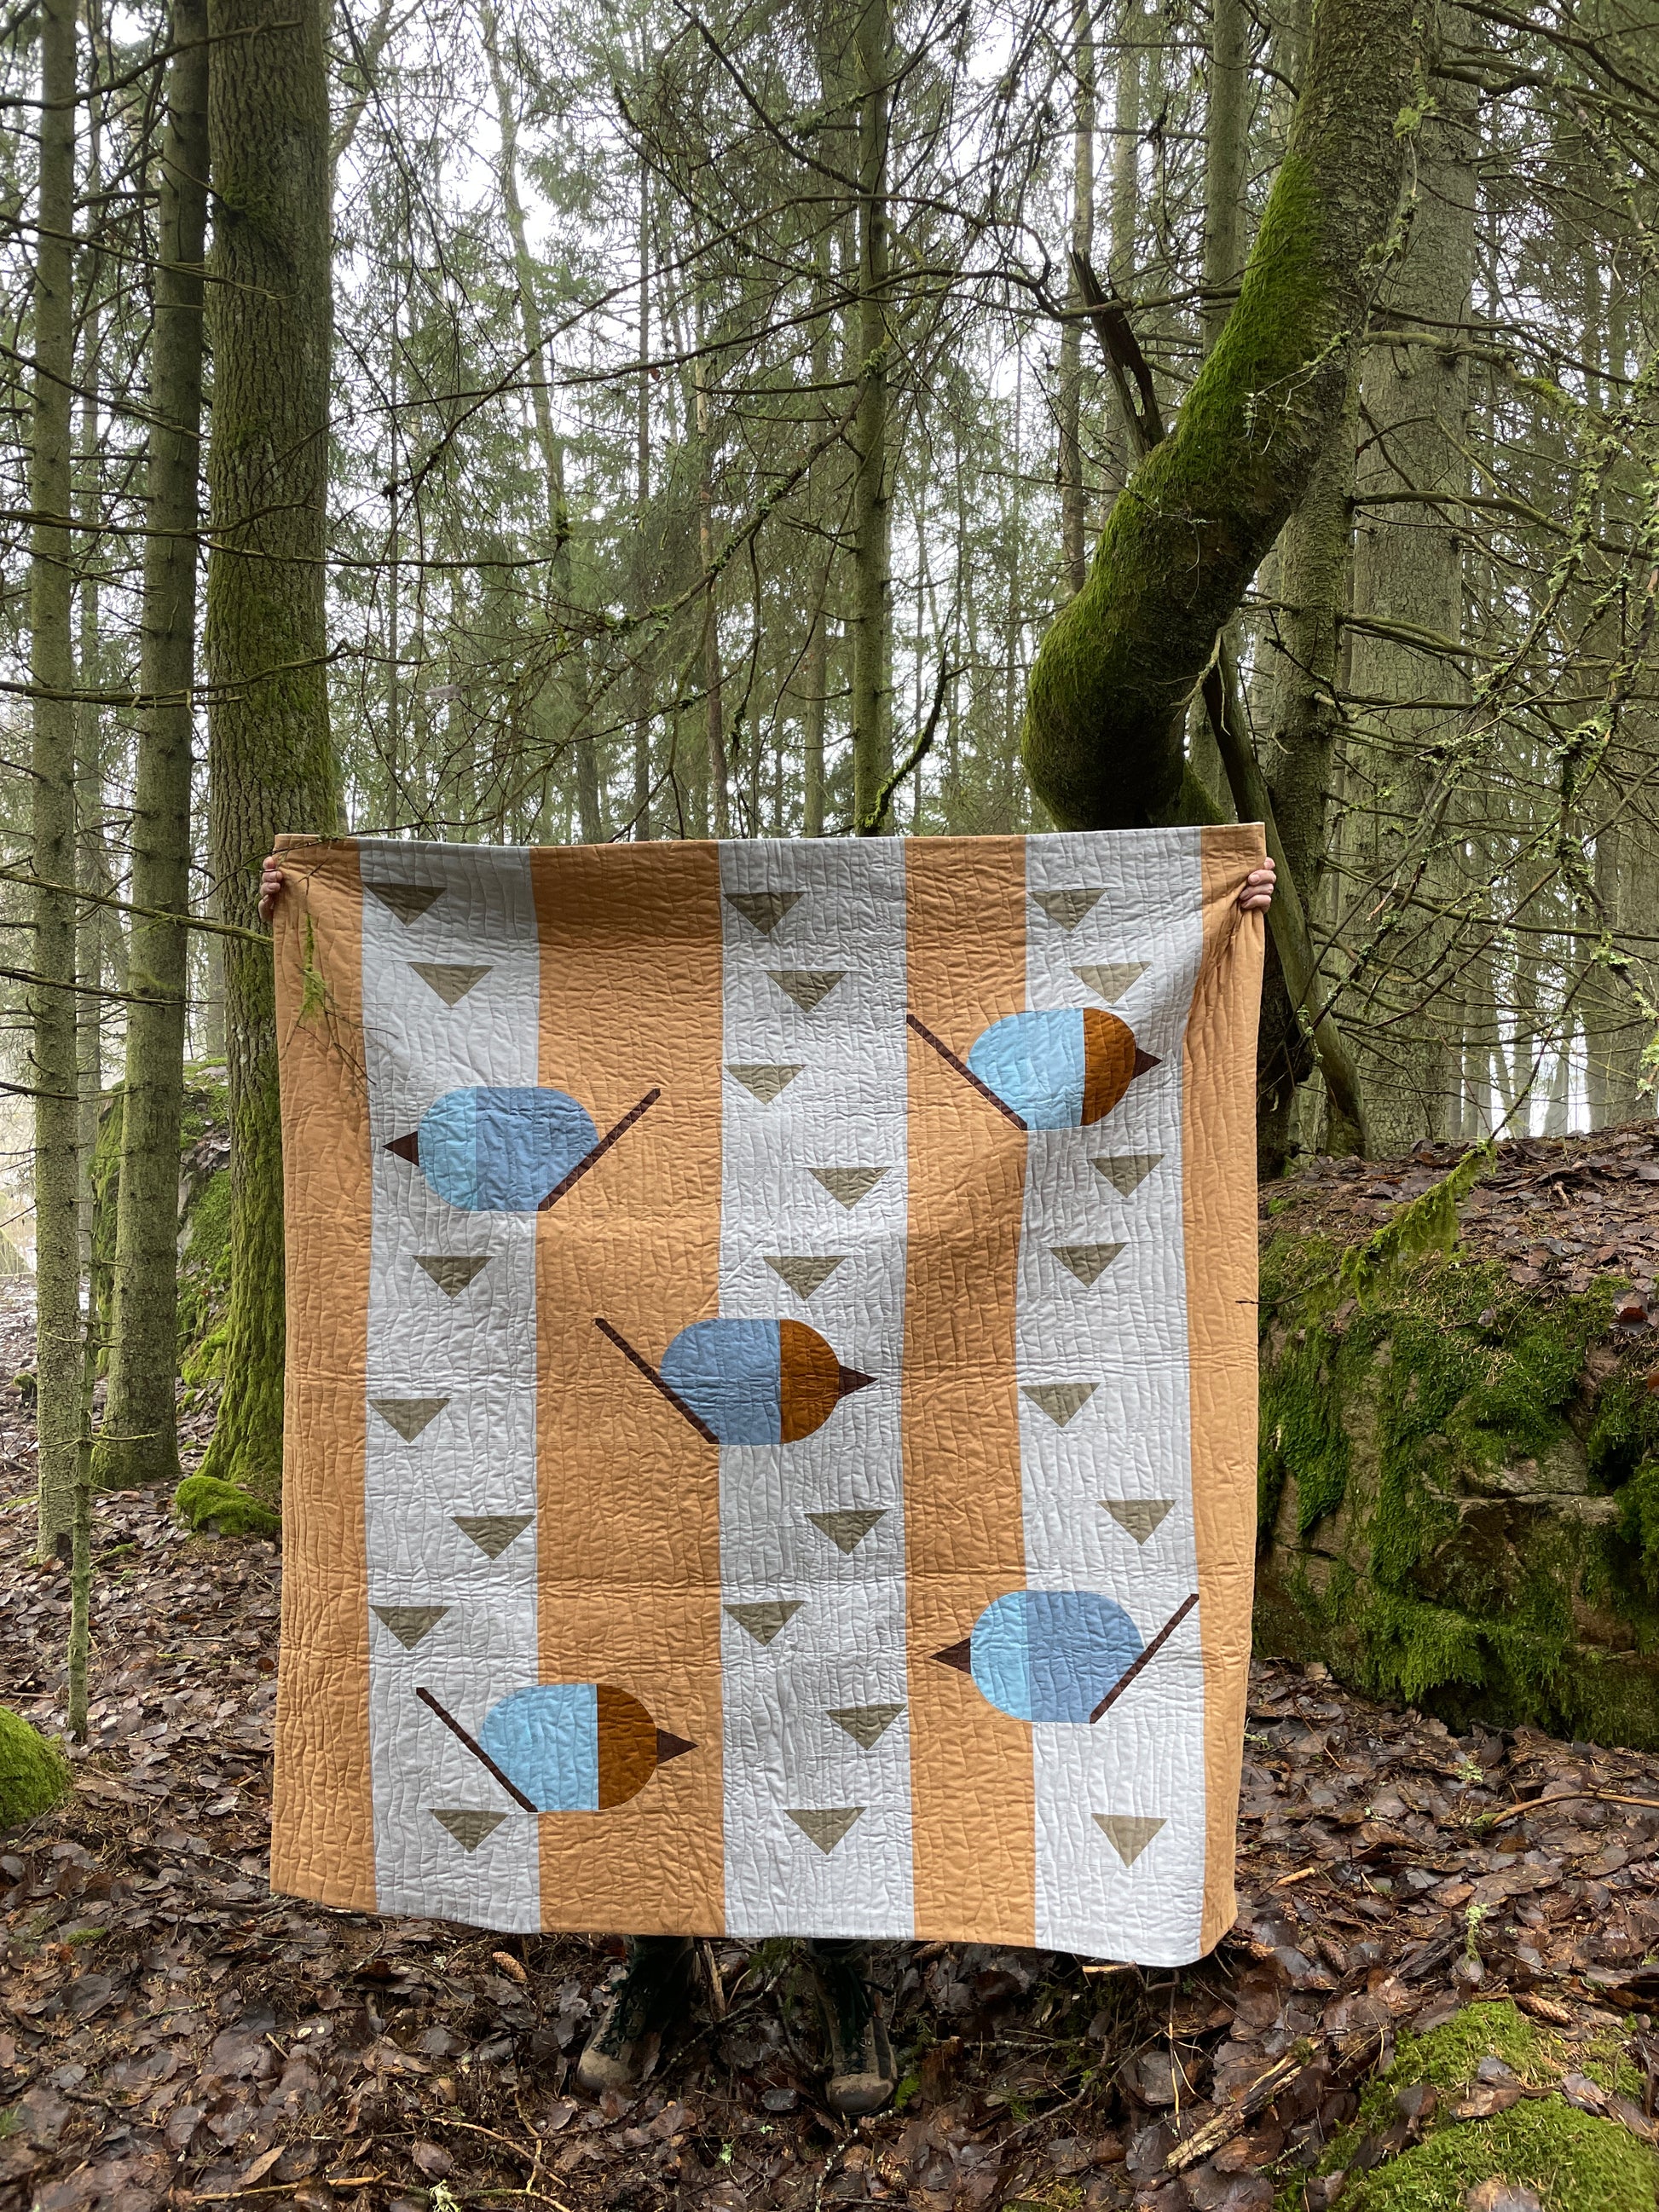 Quilt in the forest